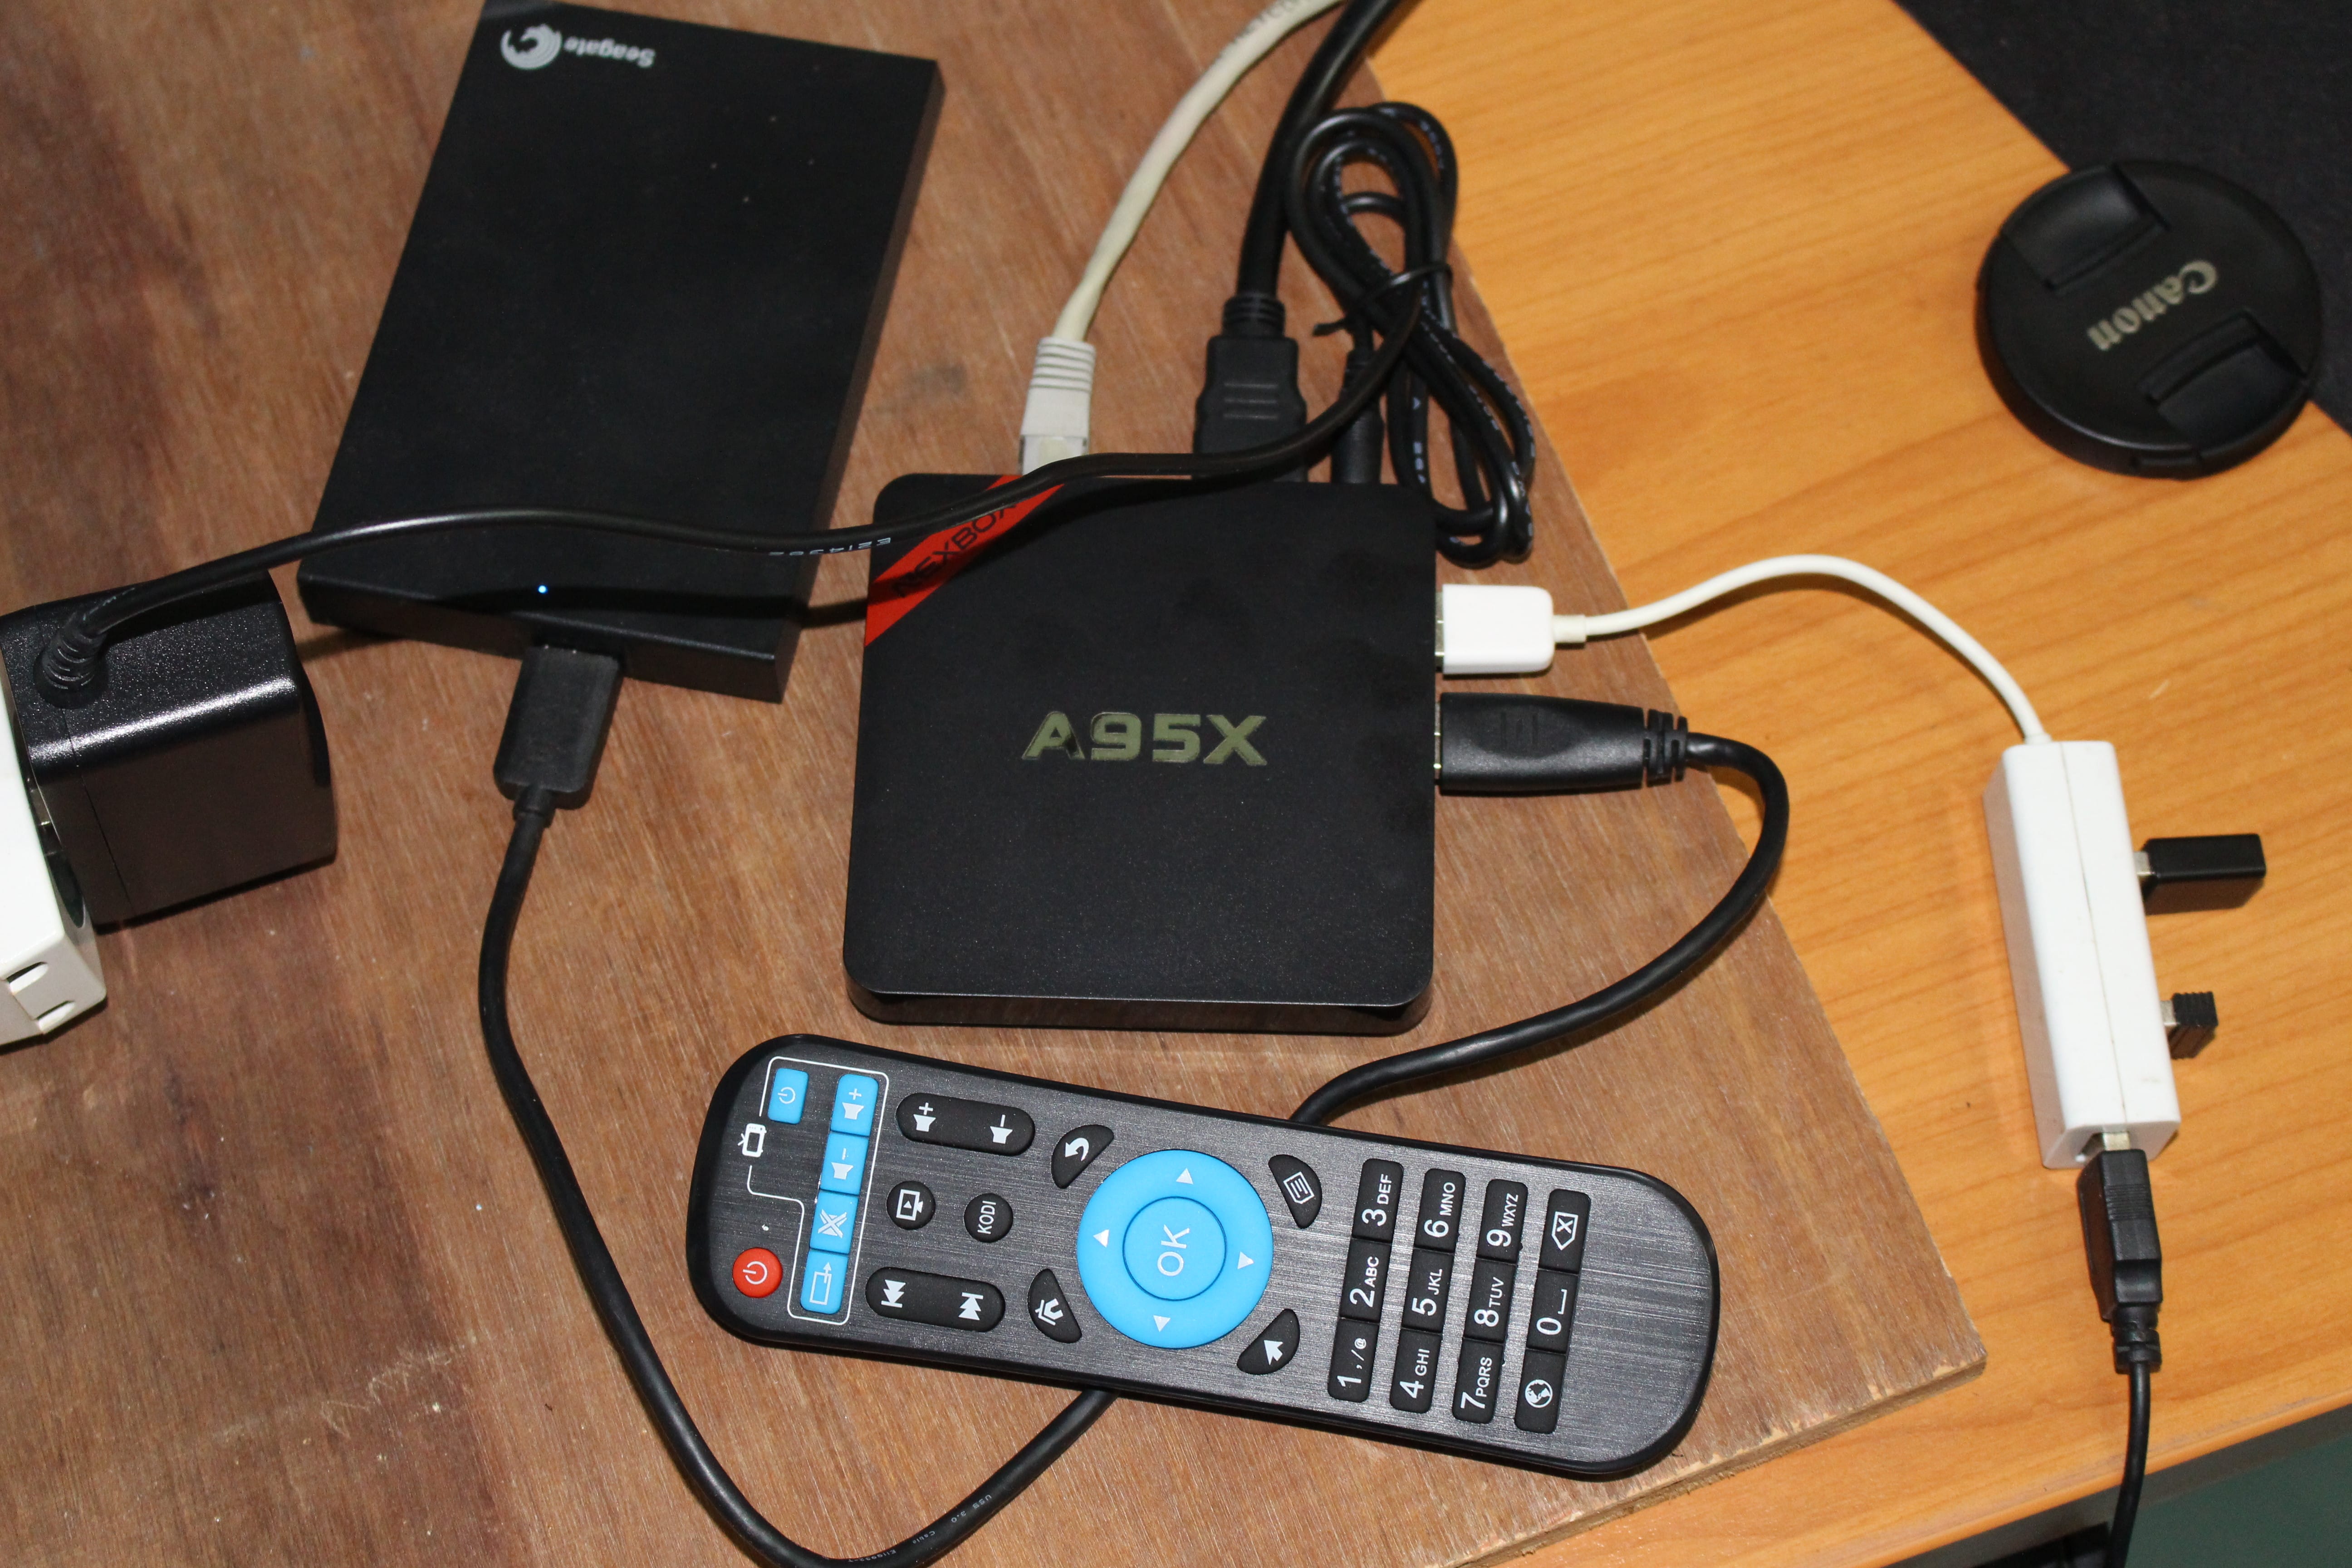 NEXBOX A95X (Amlogic S905X) TV Box Review - Part 2: Android 6.0 